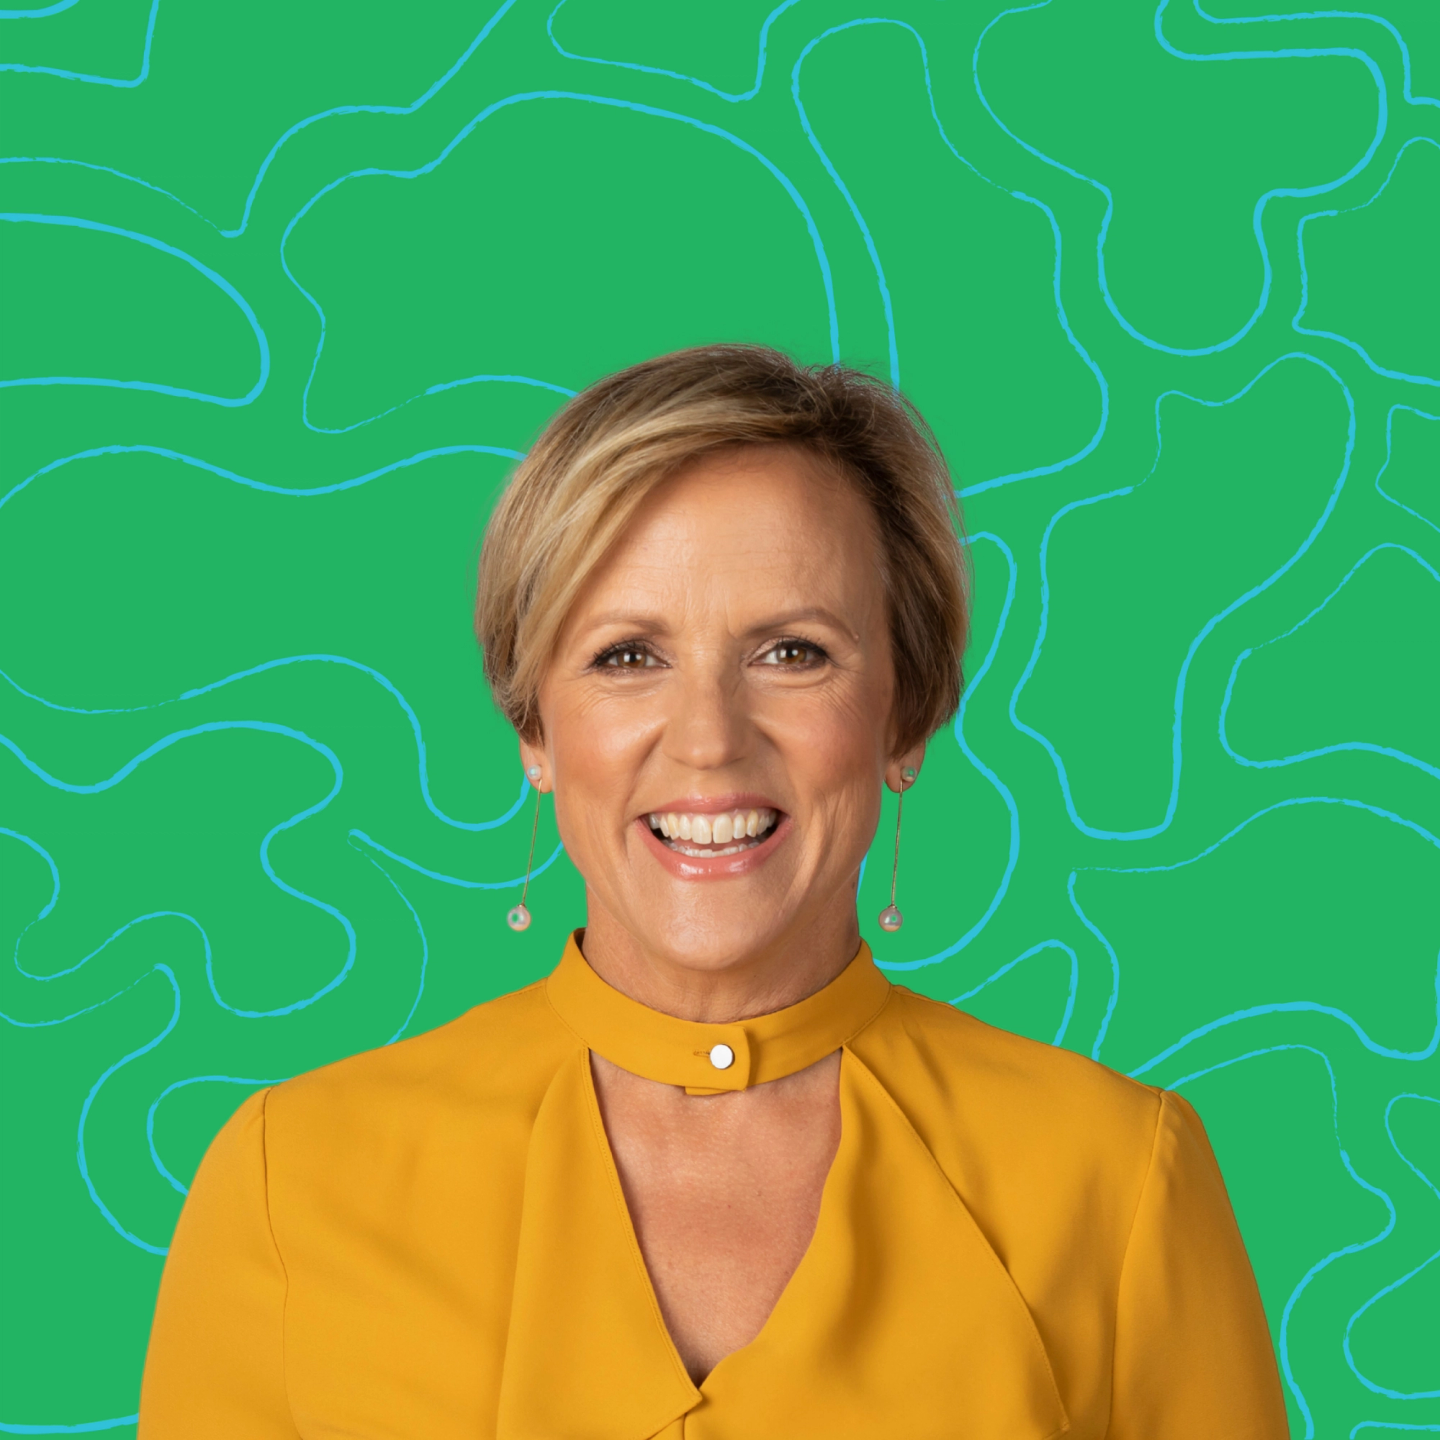 Hilary Barry is doing the ChildFund Water Run